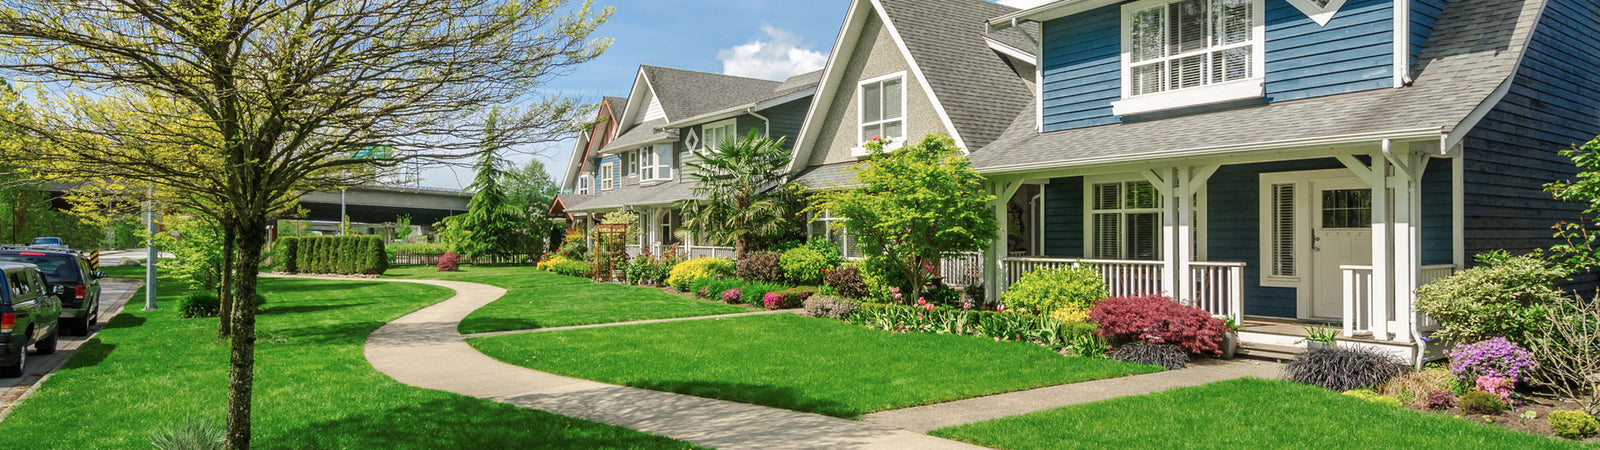 Step Up Your Curb Appeal with Healthy Lawn Soil